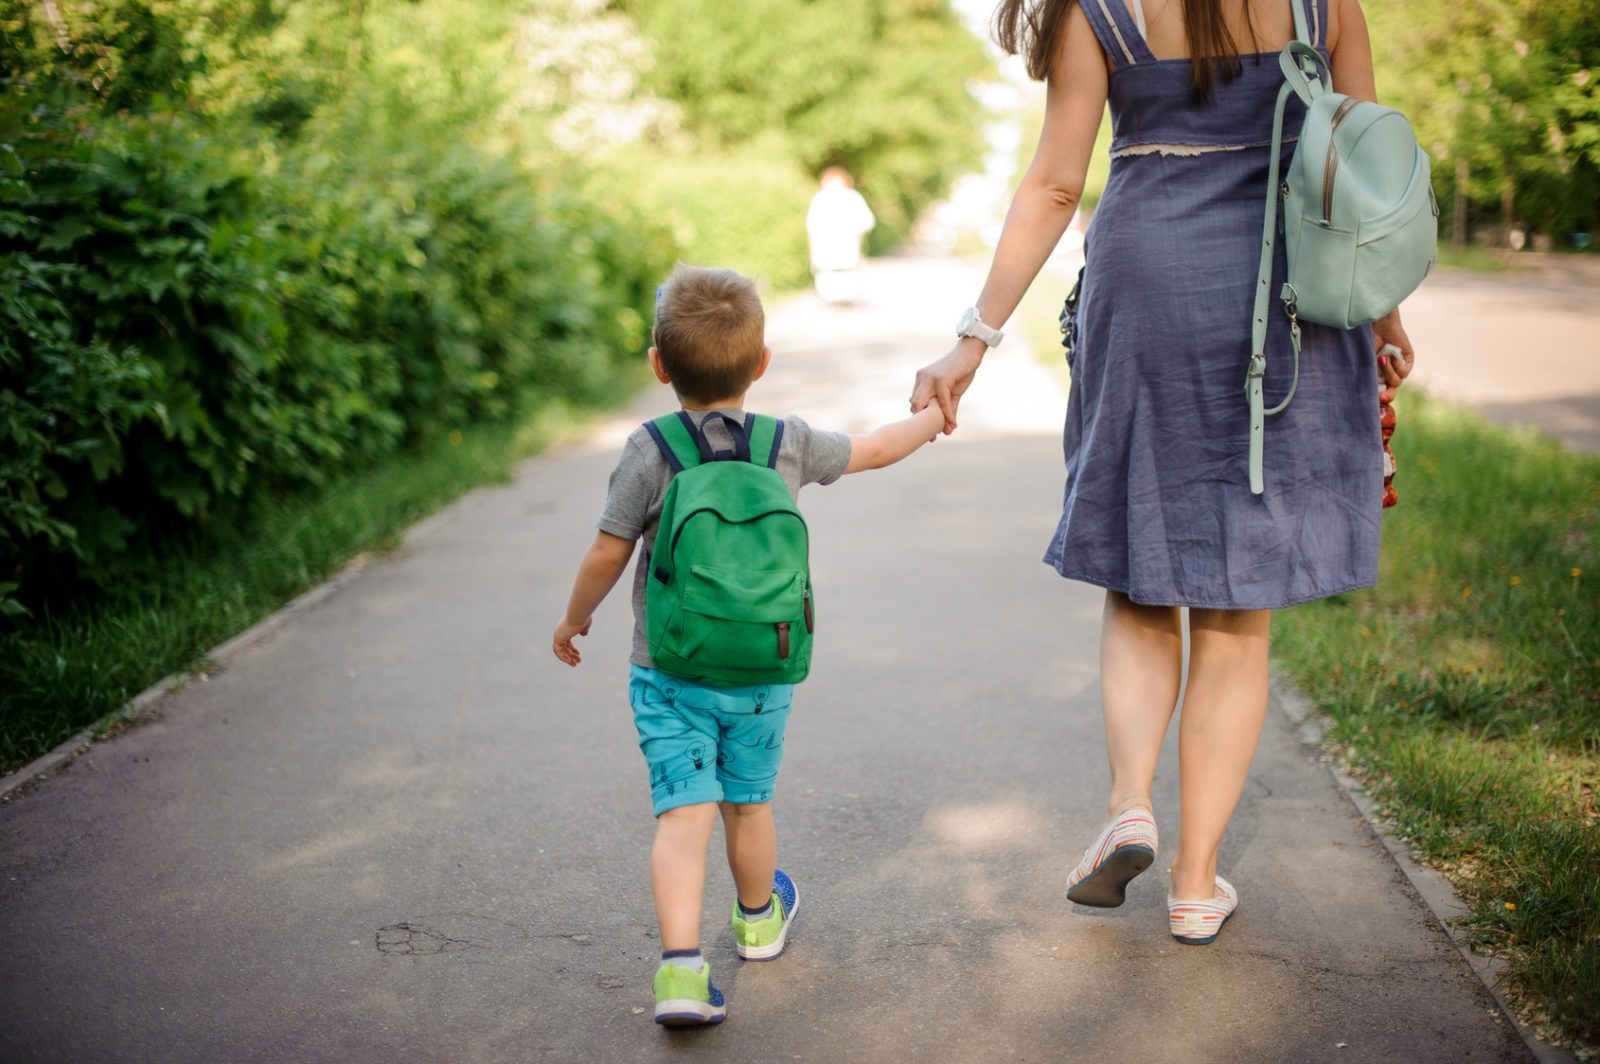 Q: Should school breaks be included in parenting time schedules?